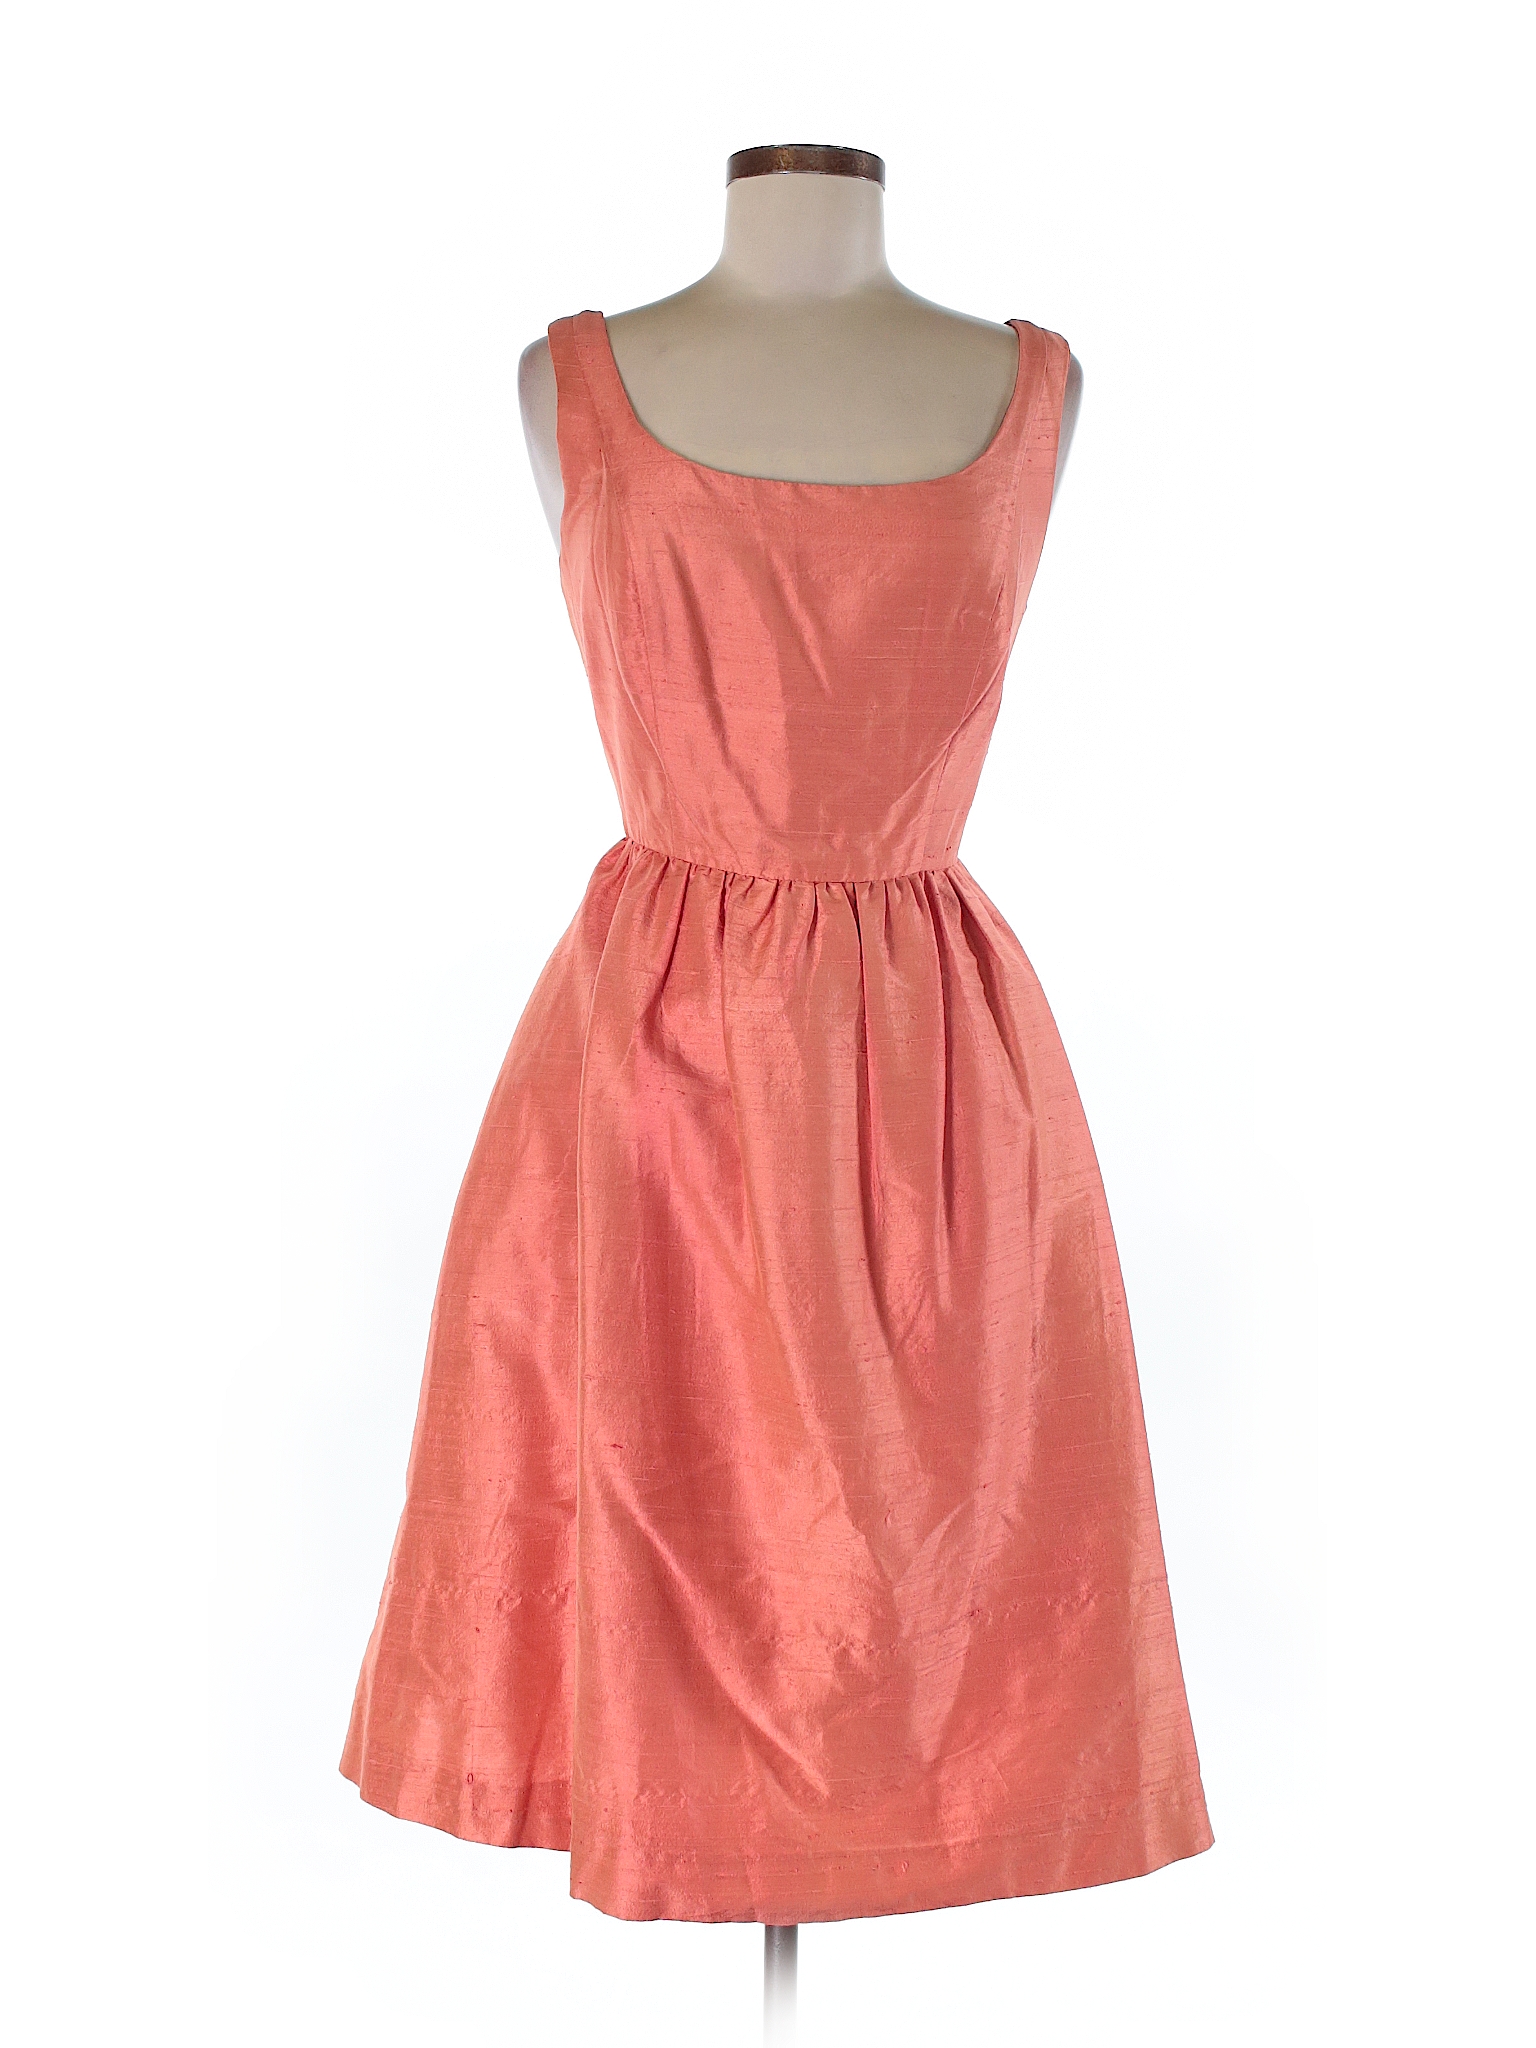 Lula Kate Solid Coral Casual Dress Size 8 - 89% off | thredUP